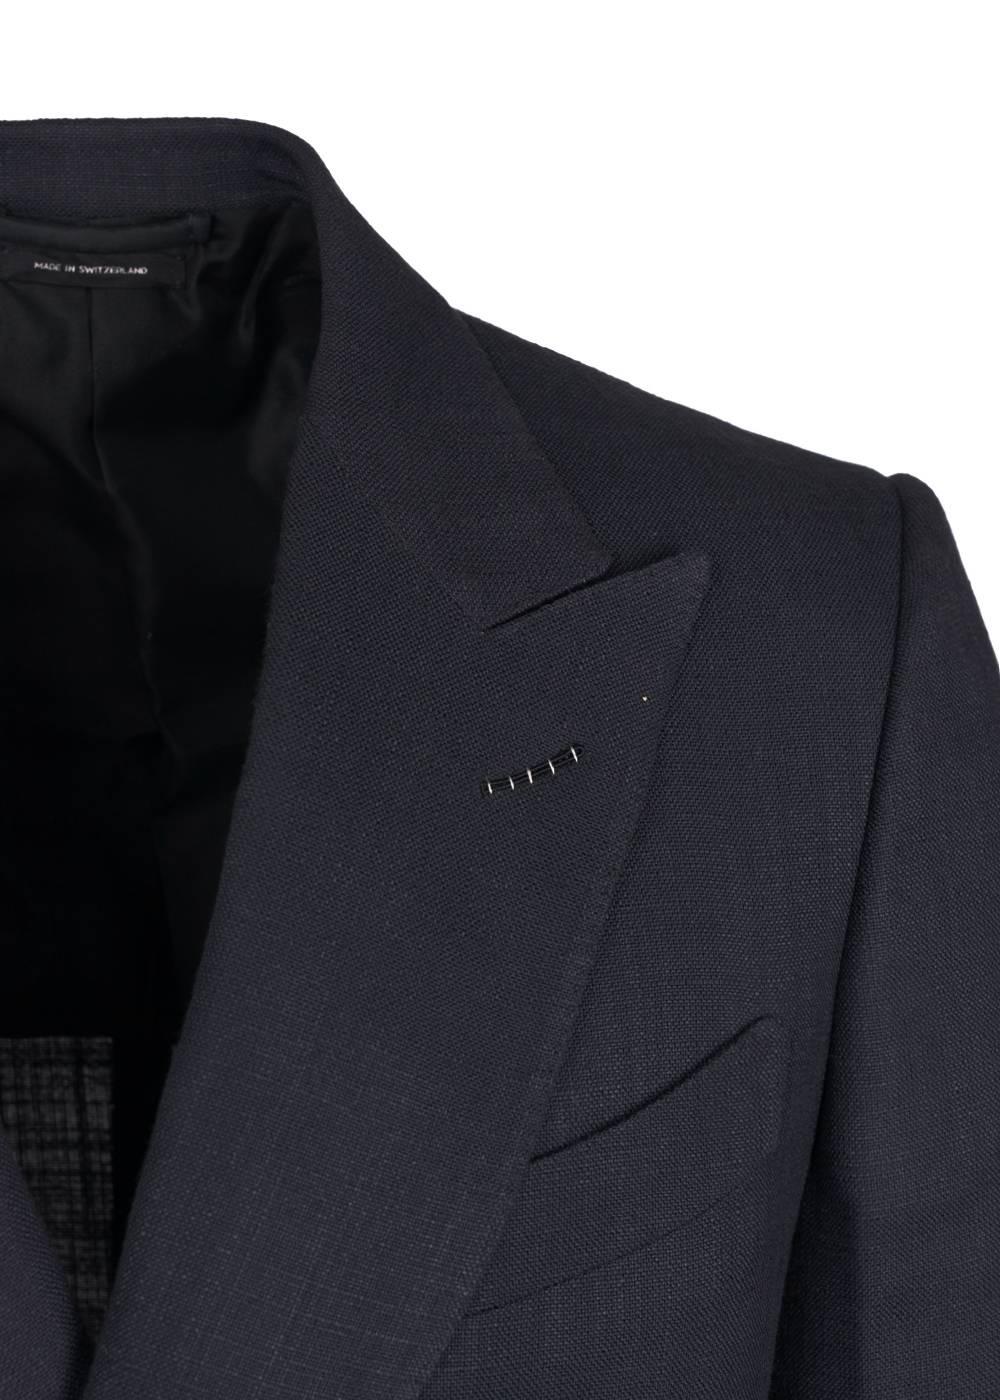 Tom Ford Black Viscose Shelton Double Breasted Jacket In New Condition For Sale In Brooklyn, NY